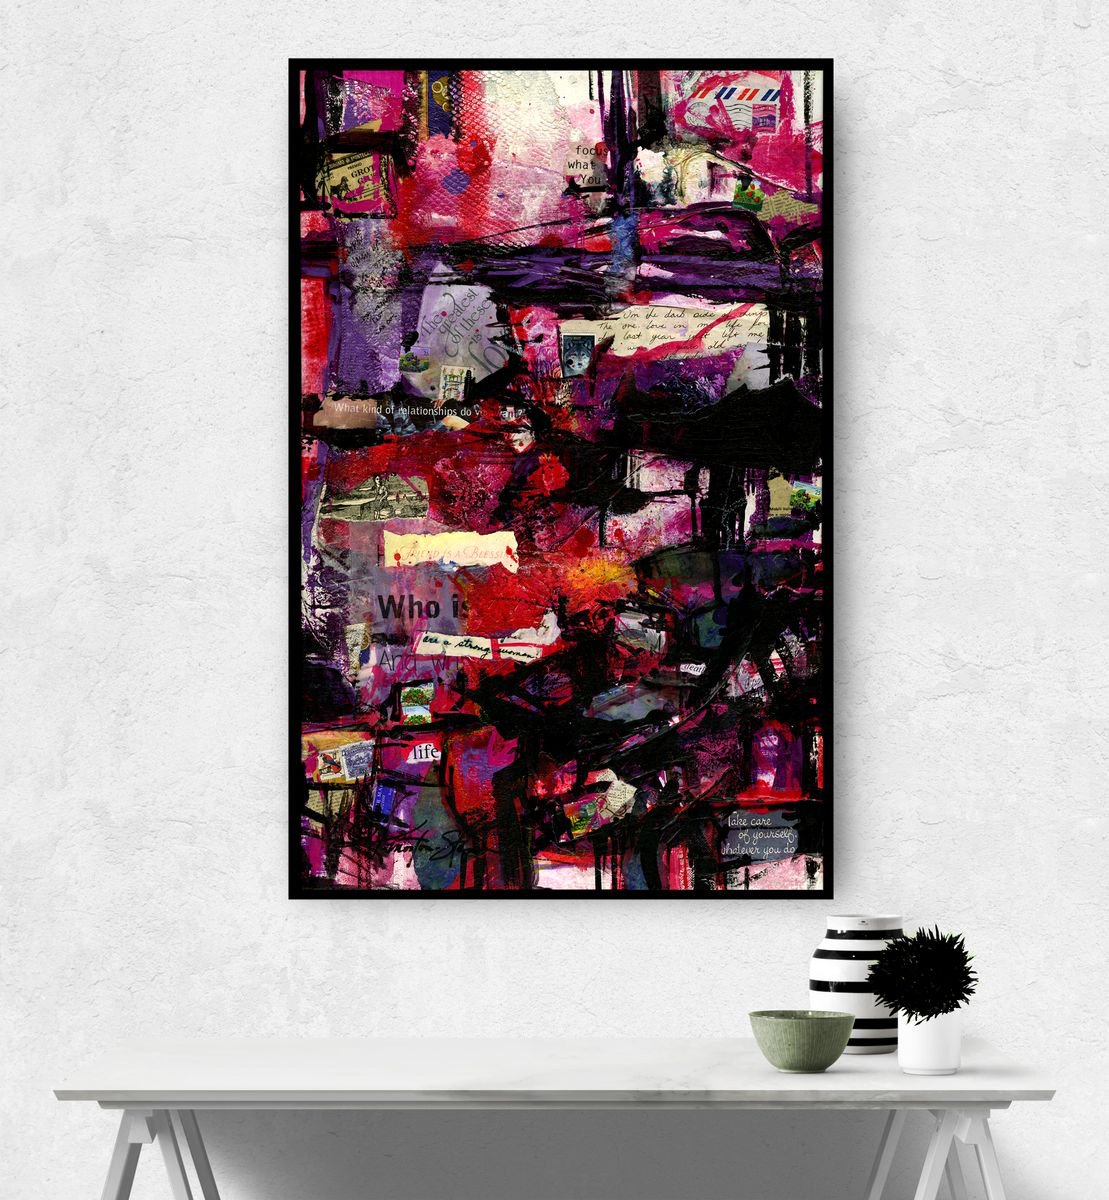 Life - Framed Abstract Mixed Media Painting by Kathy Morton Stanion, Modern Home decor, re... by Kathy Morton Stanion